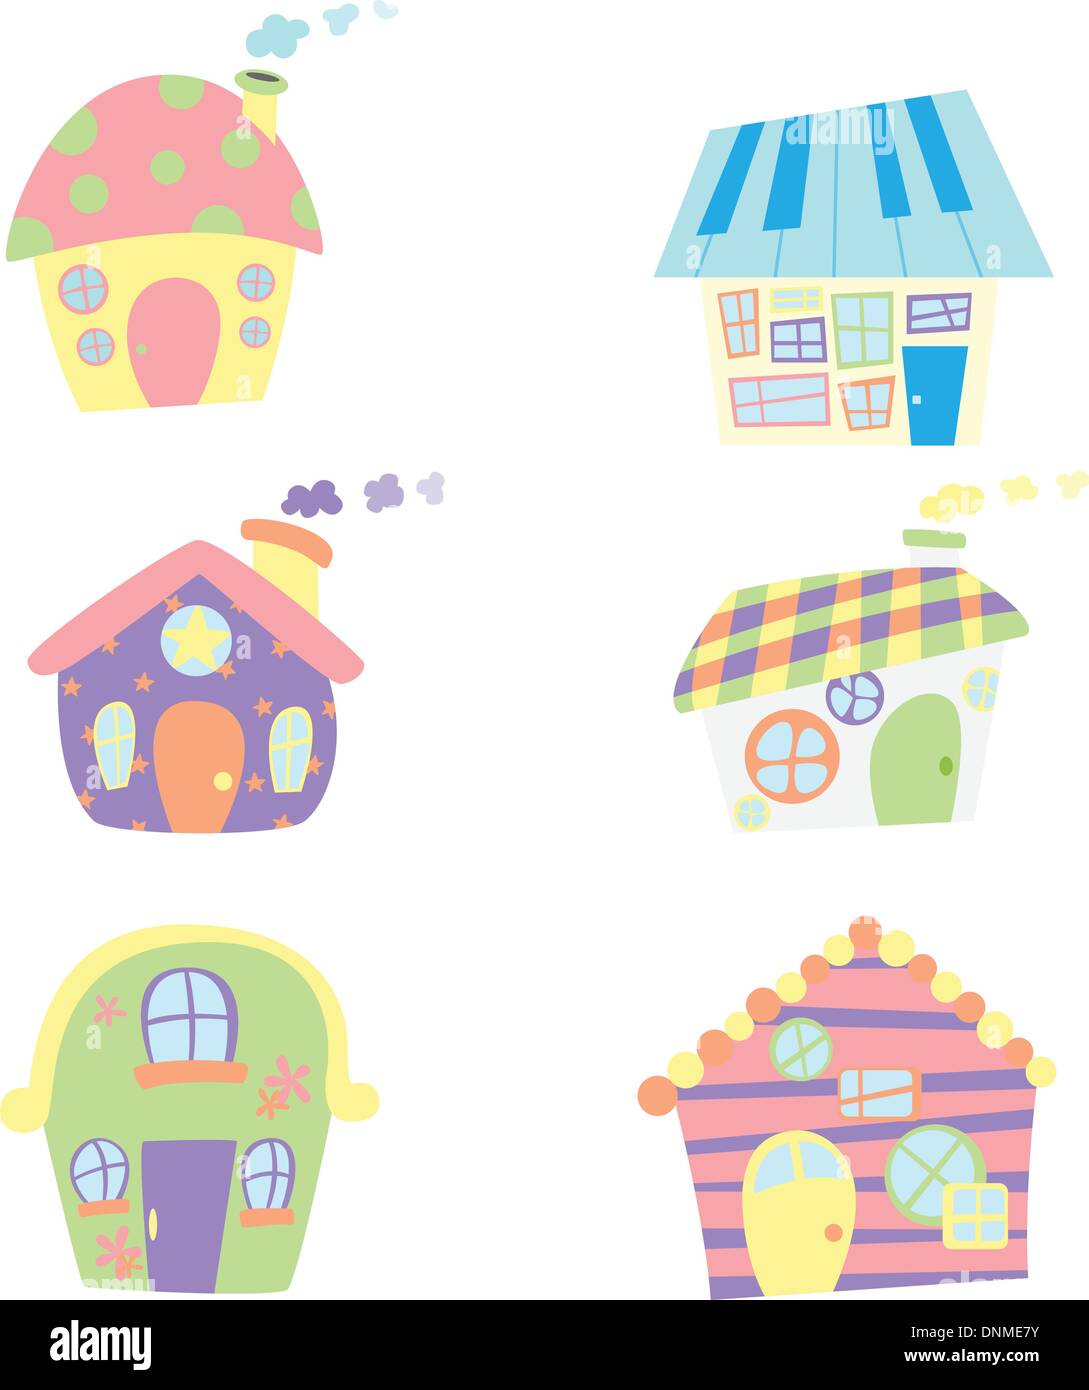 A vector illustration of cute houses icons Stock Vector